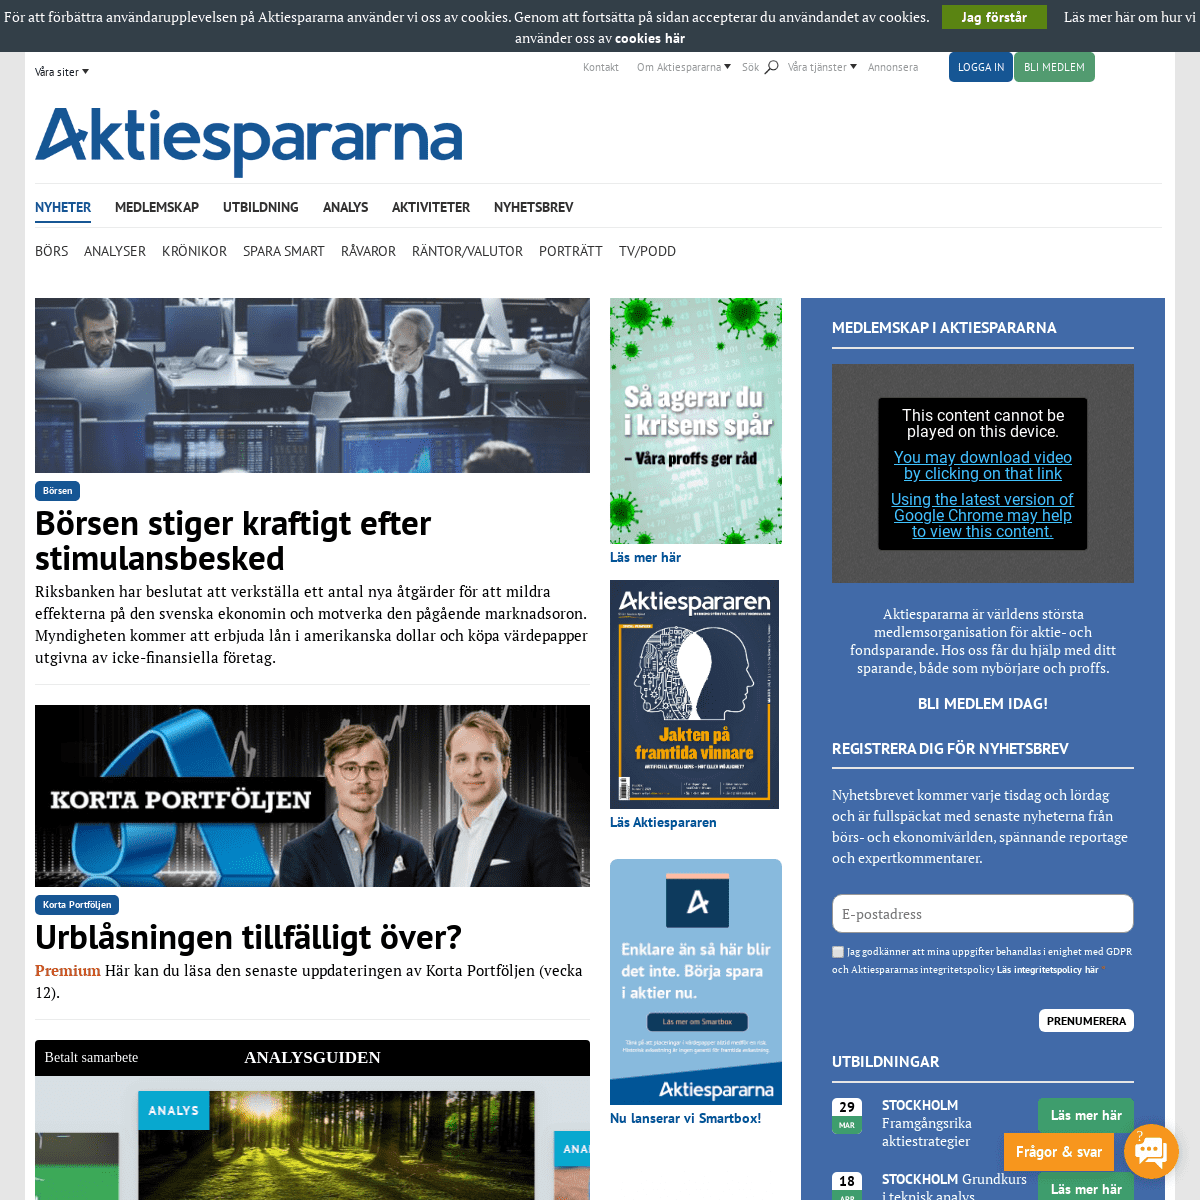 A complete backup of aktiespararna.se